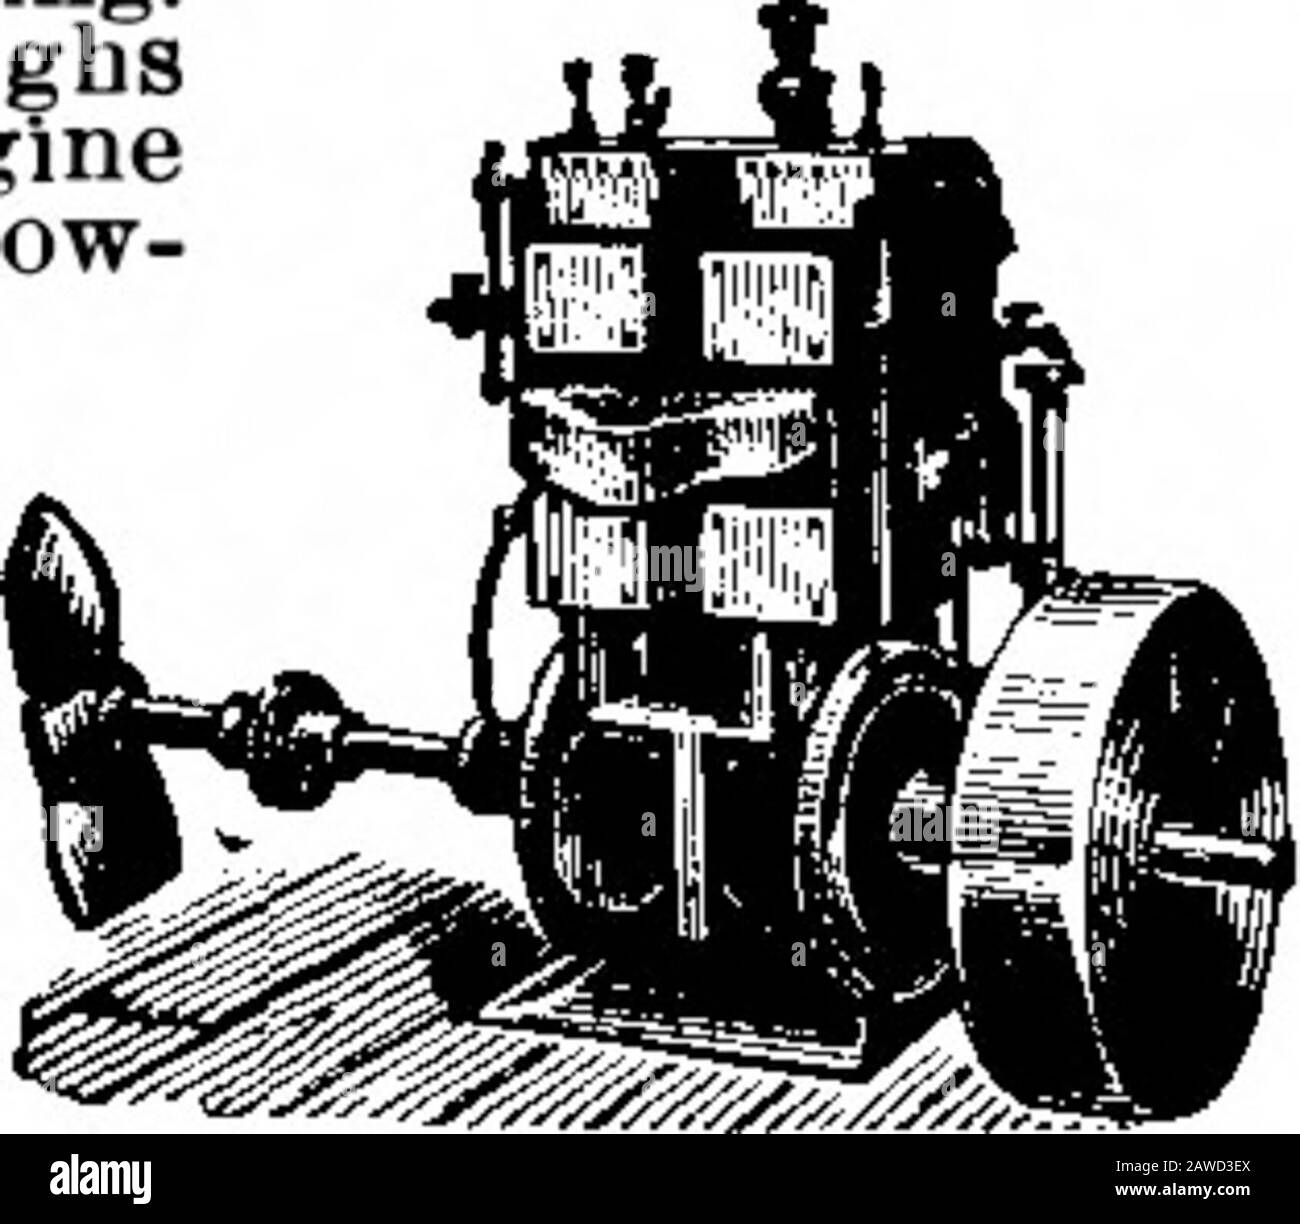 Scientific American Volume 76 Number 13 (March 1897) . THE IMPROVED GAS ENGINE. Two cylinders in one casting.Occupies less space and weighsless for its power than any enginemade. Can be used wherever pow-er is required. Either sta-tionary or marine. No Are.No heat. No smoke. No li-censed engineer required. B3T Send for catalogue.SINTZ GAS ENGINE CO..Grand Rapids,Mich., 17. S. A,. POWER? POWER? POWERS Fifty per cent, increase at no additional expense.VICTOR VAPOR ENGINE. LOCAL ftGENTS WANTED. Steam and Vapor launches Row and Sail Boats.Send for catalogue. Specify*one wanted. TH0S. KANE A. 00. 6 Stock Photo